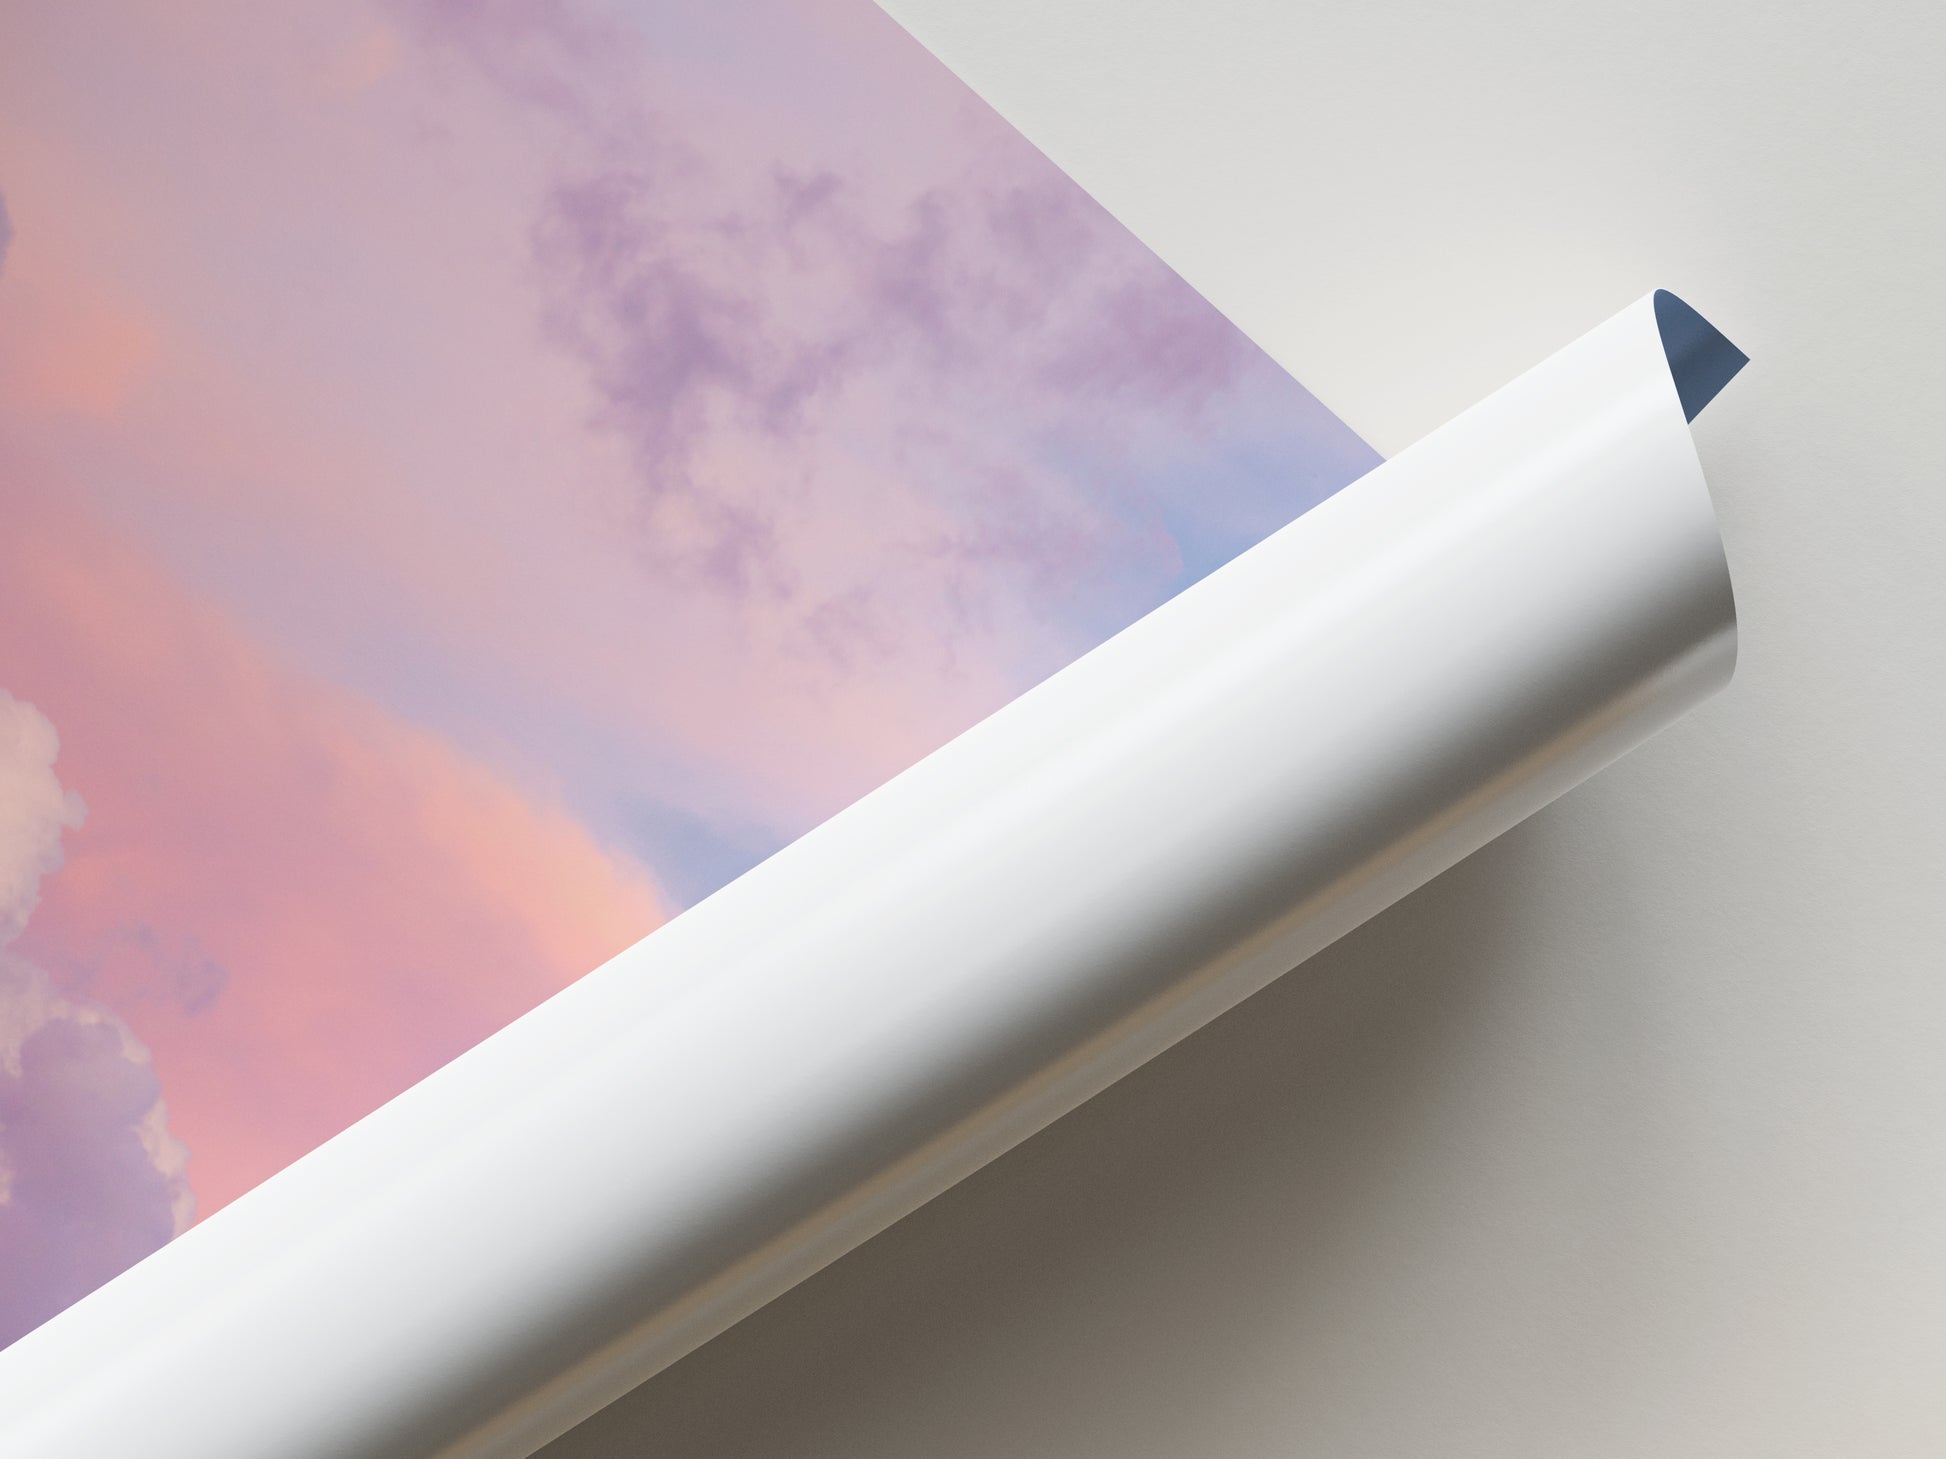 Vinyl, Waterproof Product Photography Backdrop. Dreamy Sunset, Clouds, Sky. Australian Made.